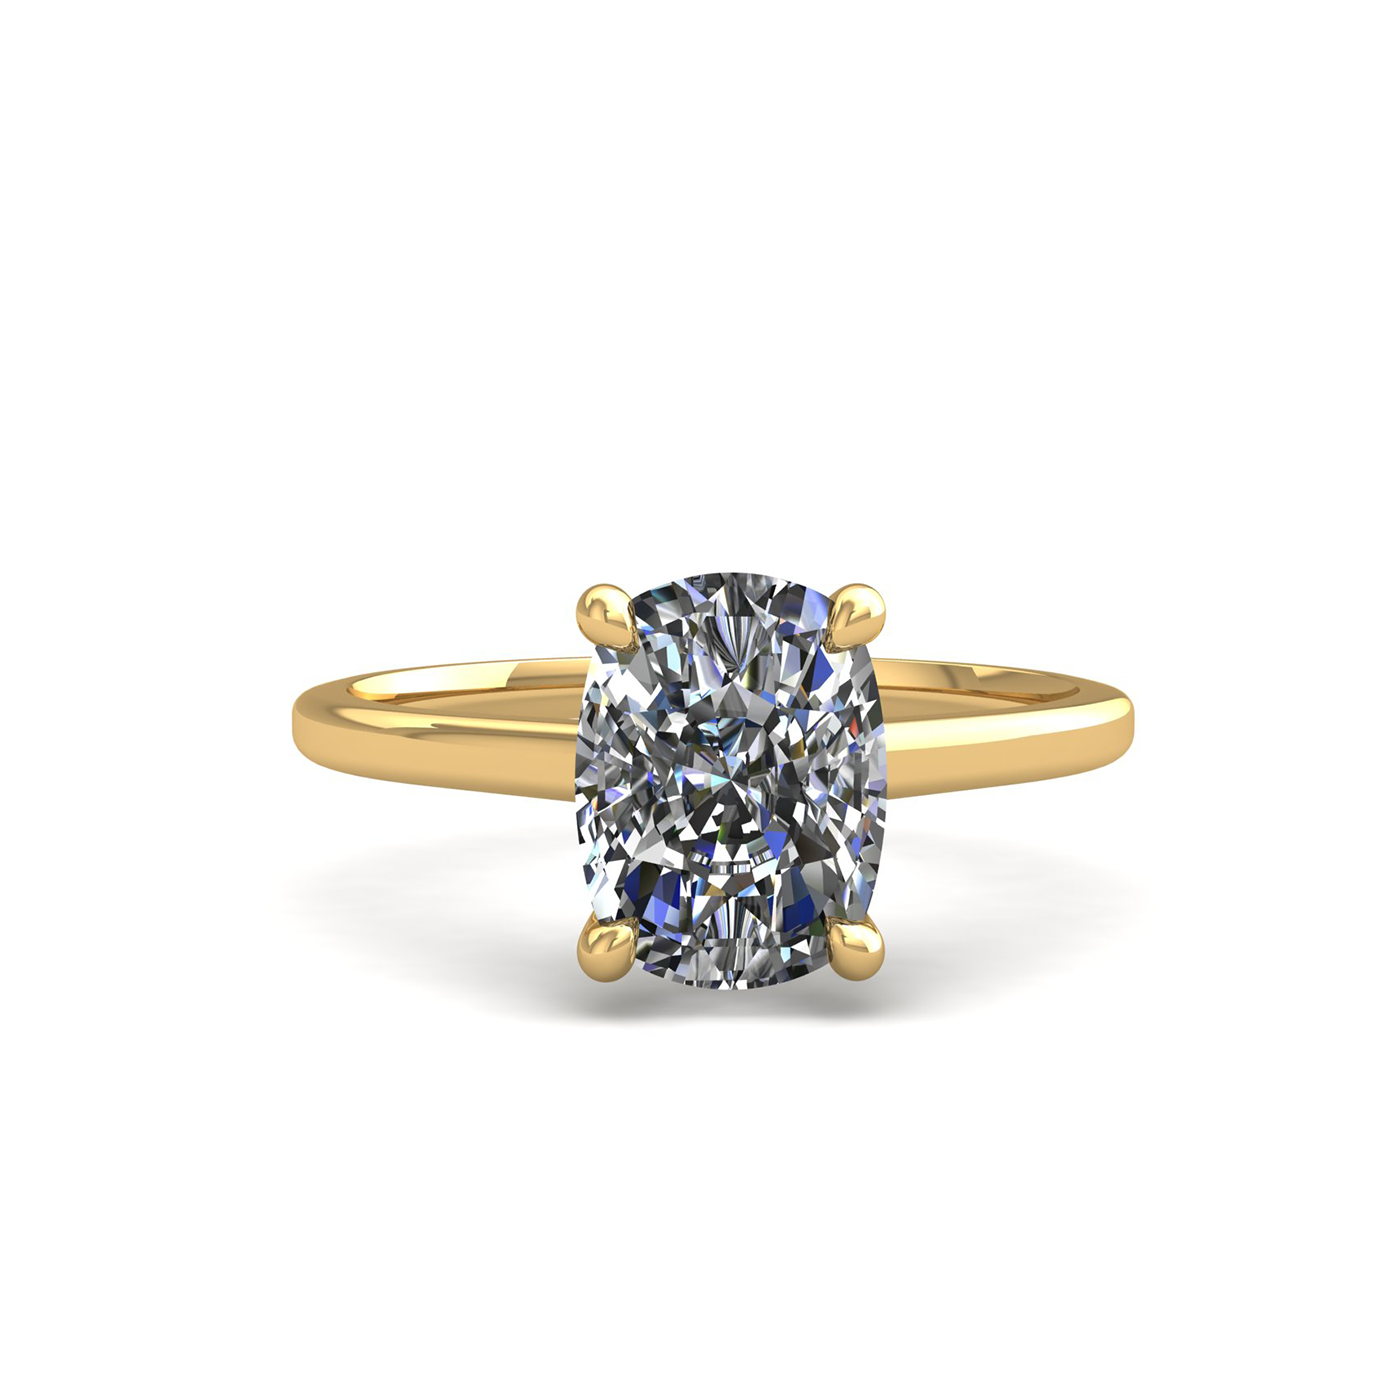 18k yellow gold 1,20 ct 4 prongs solitaire elongated cushion cut diamond engagement ring with whisper thin band Photos & images